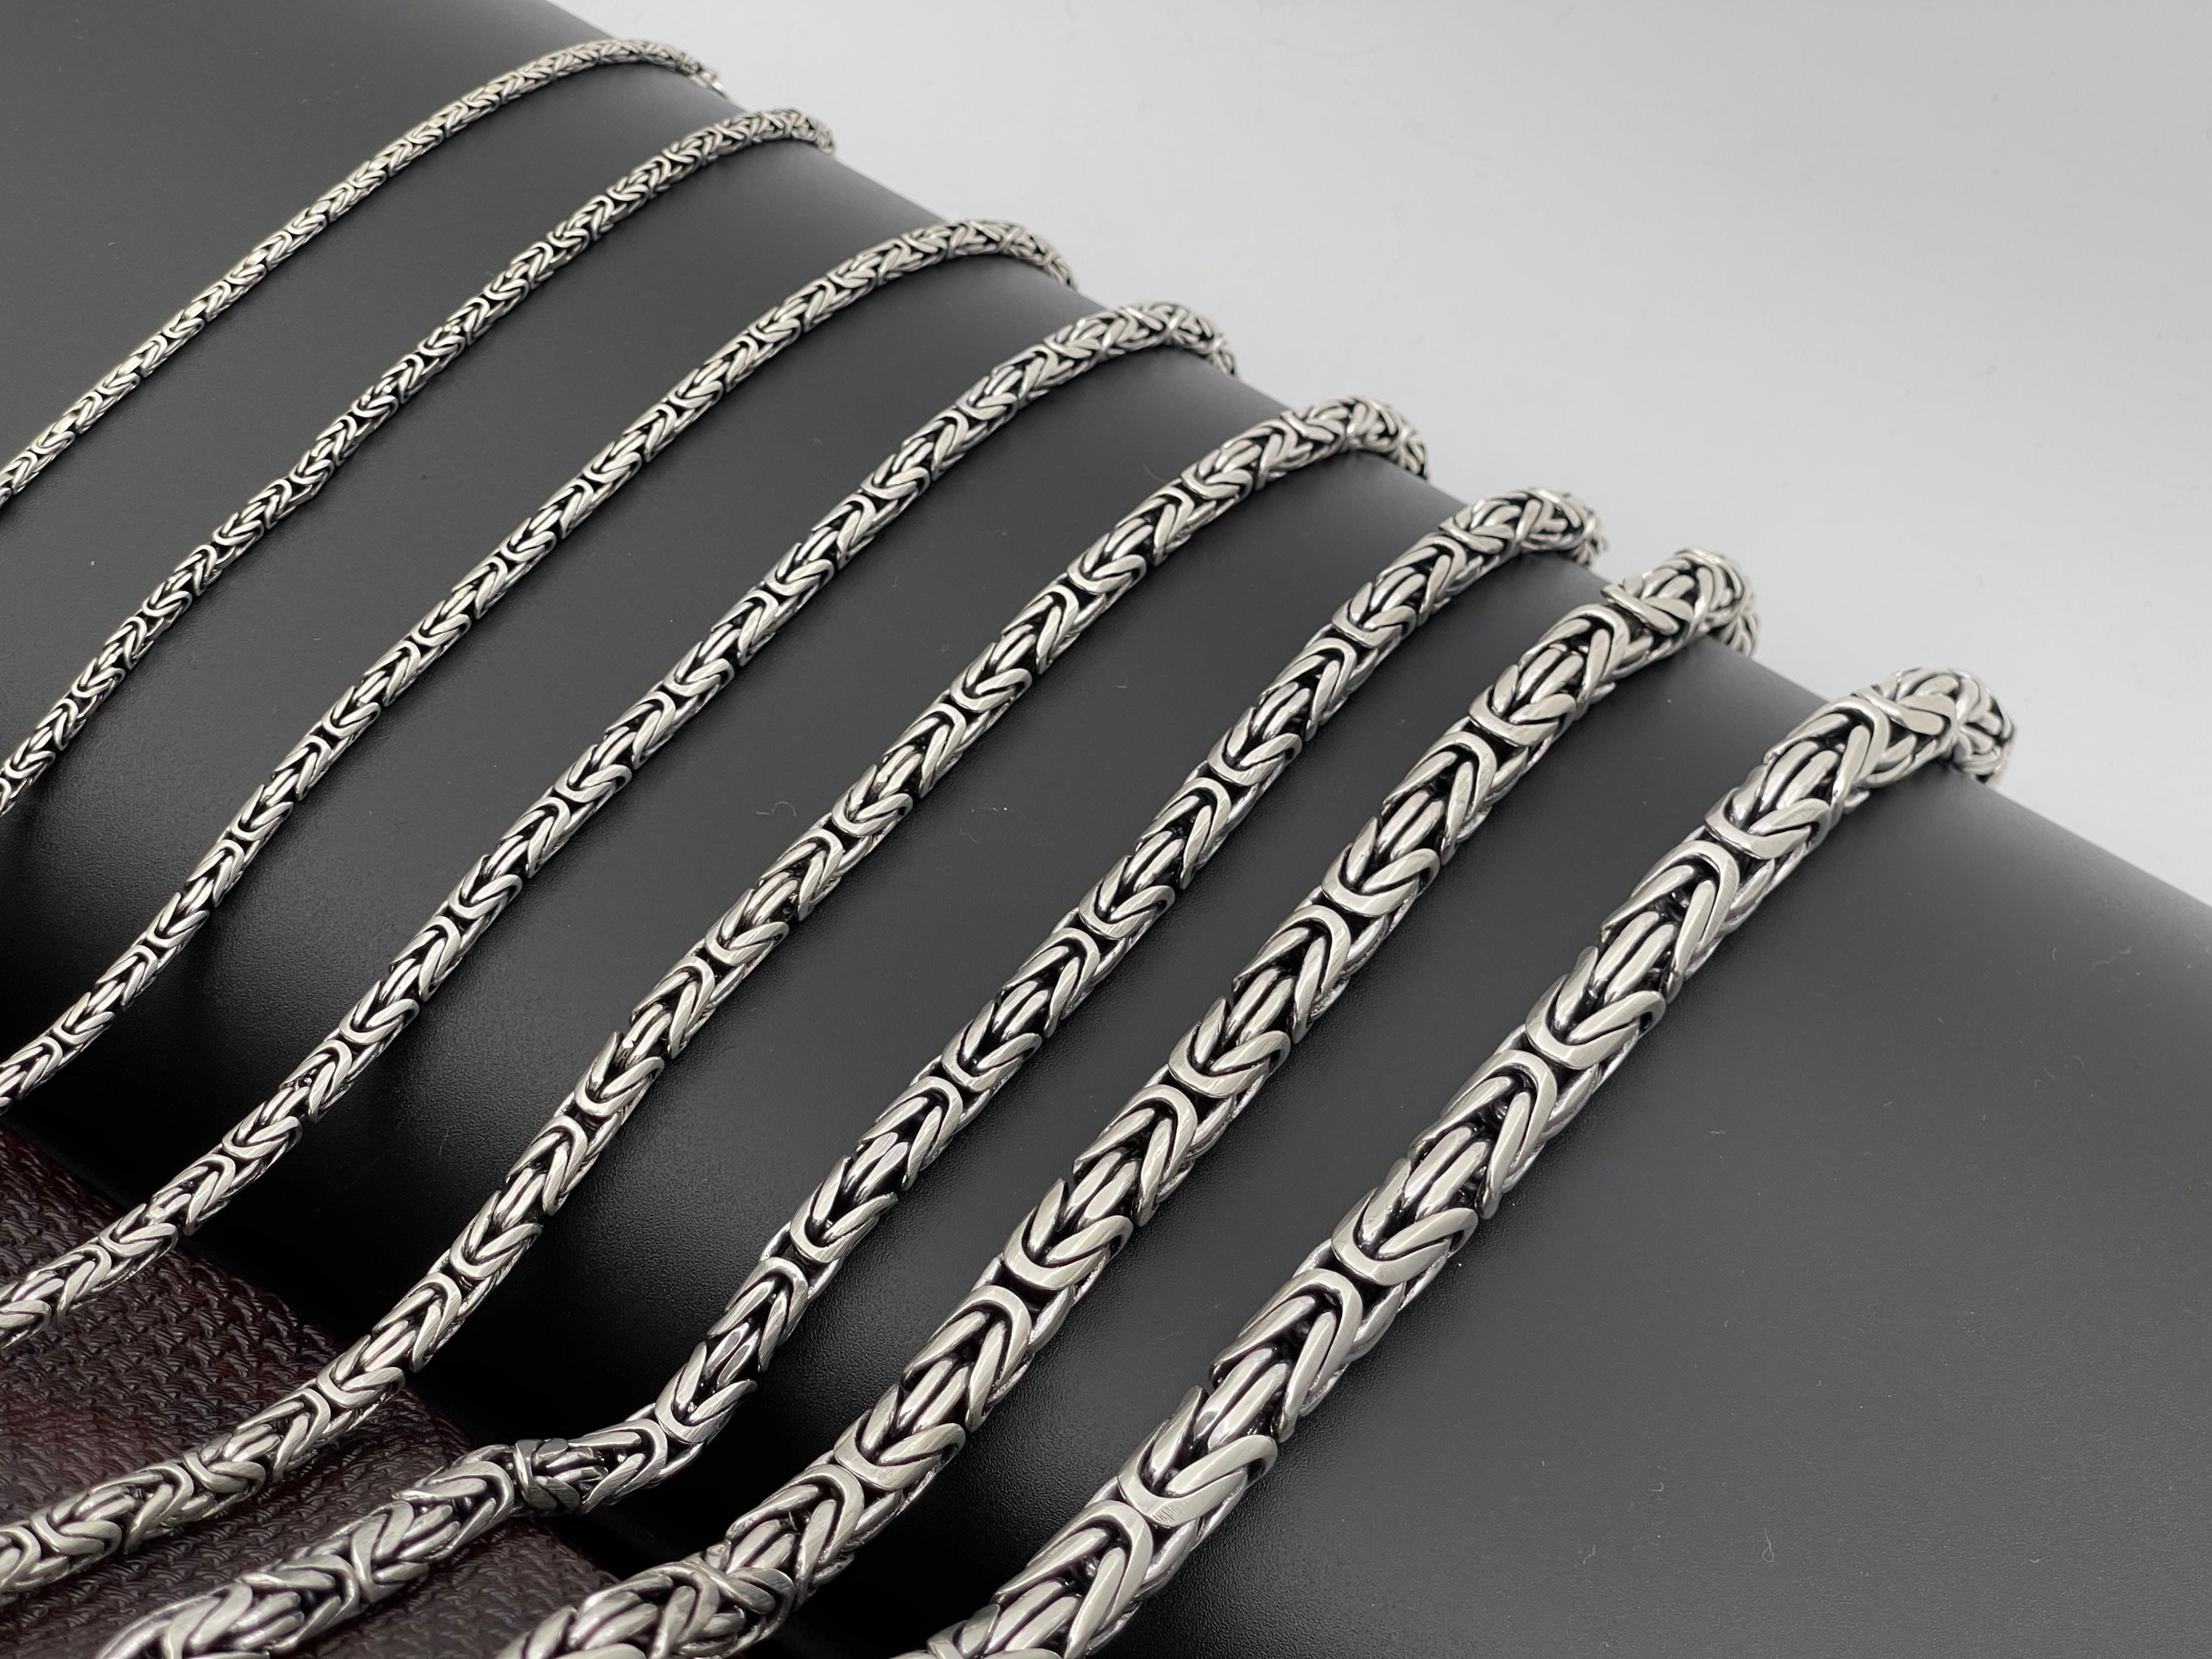 Necklace Chain, Stainless Steel Chain, Chain Necklace, Unique Chains, Snake  Chain, Box Chain, Necklace Chain for Men, Chain Necklace Women. 